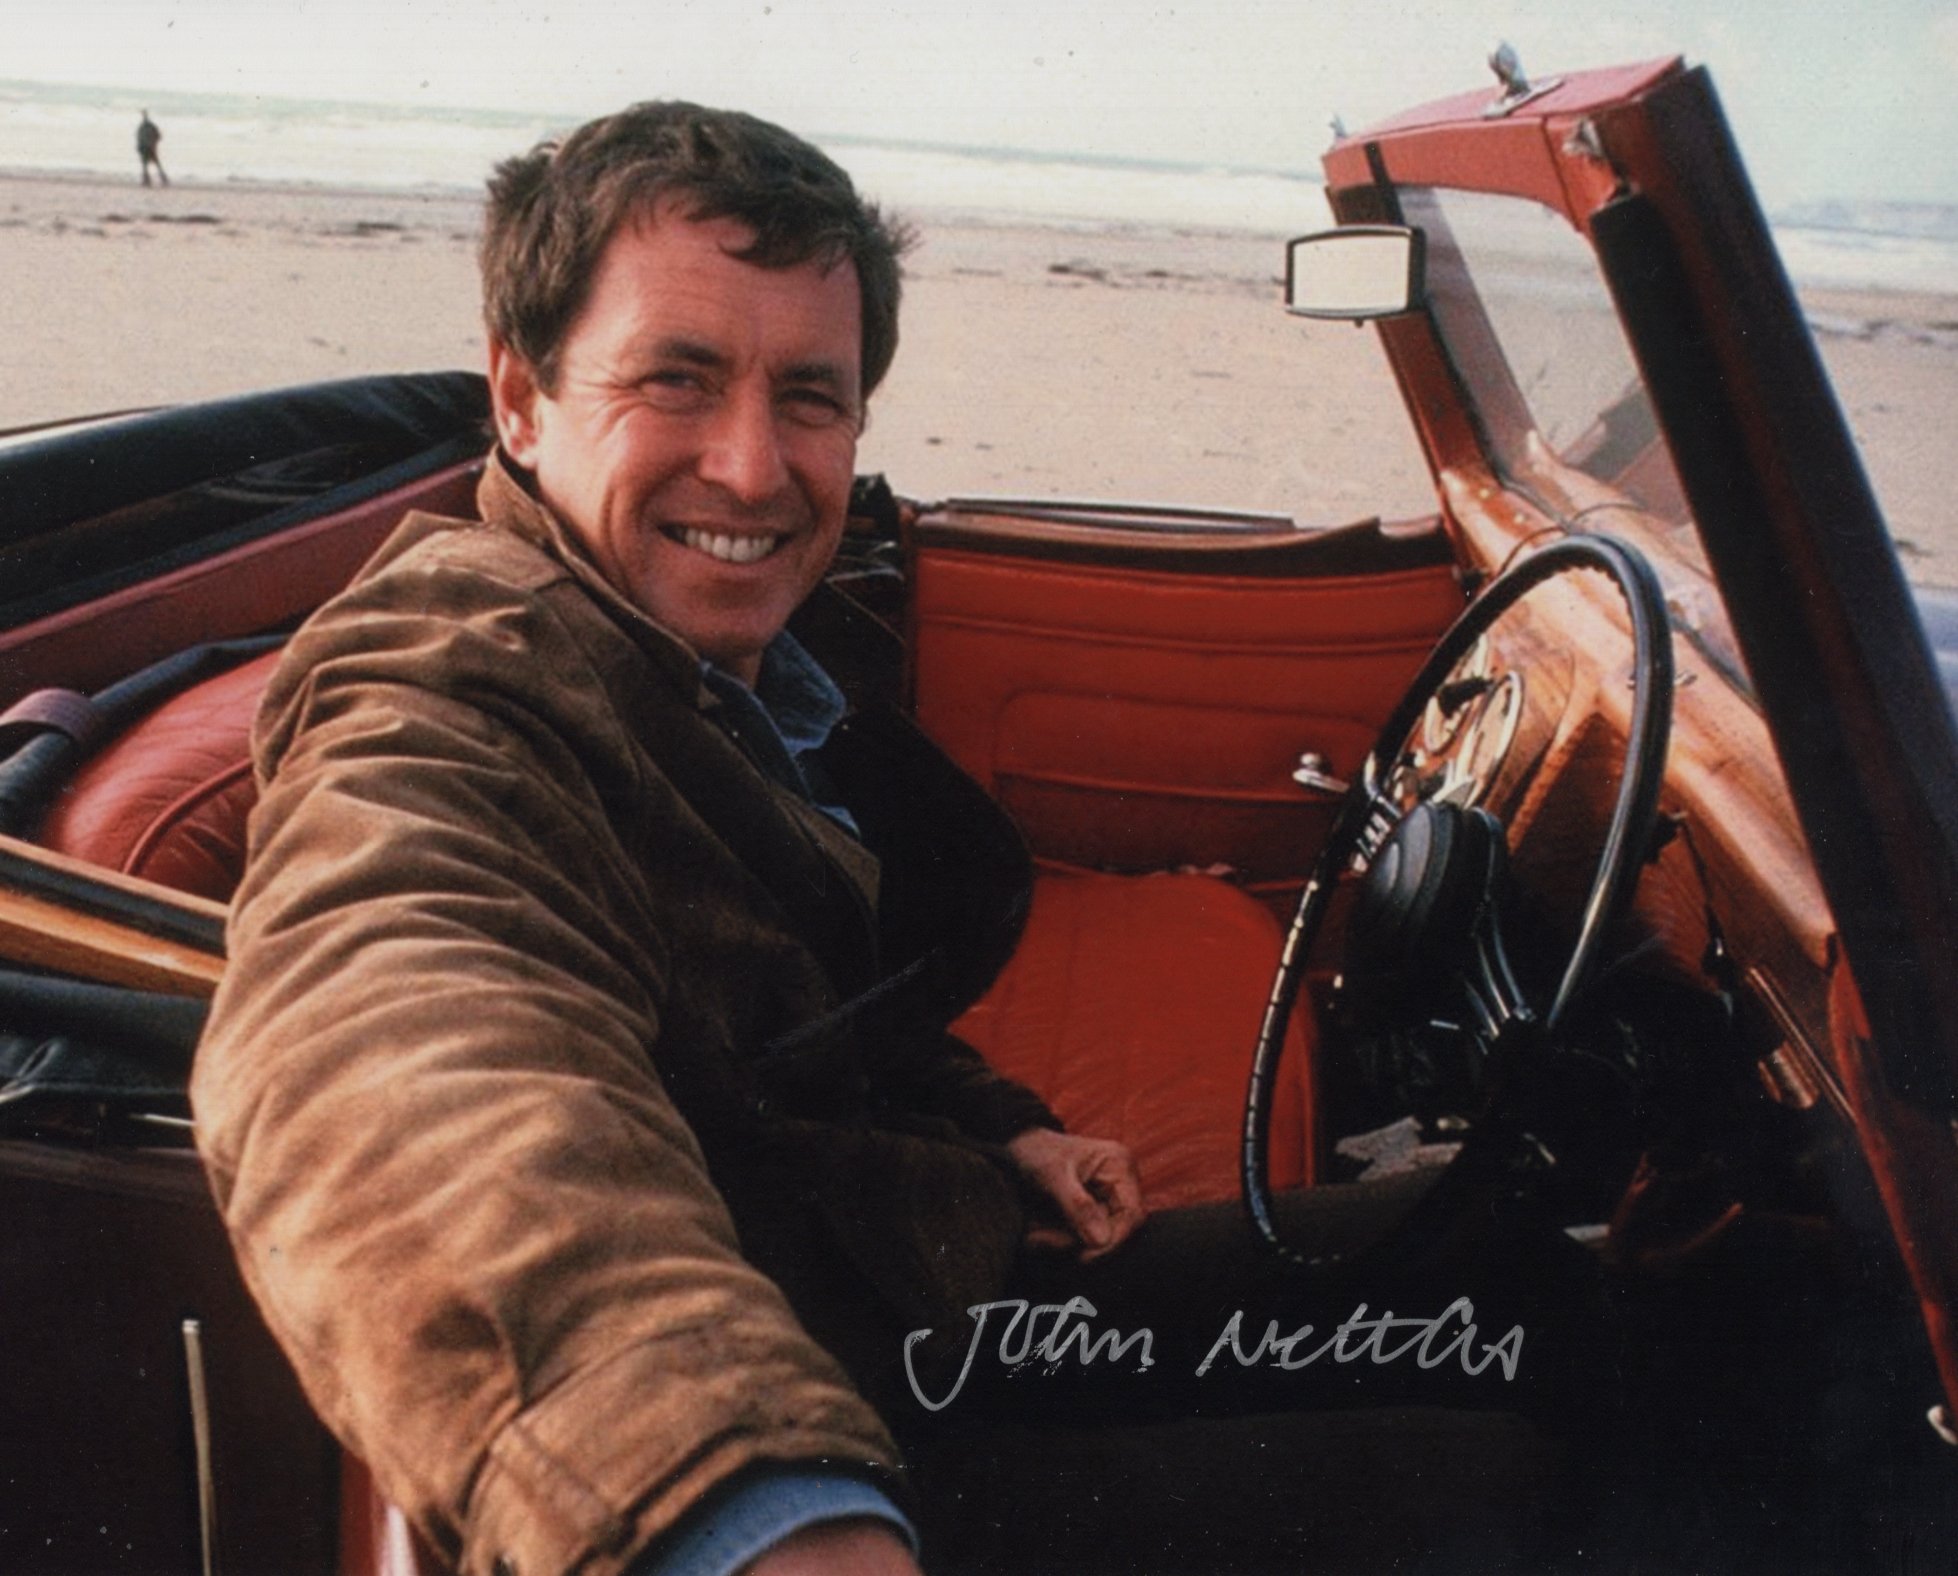 Bergerac popular TV crime drama series 8x10 inch colour scene photo signed by actor John Nettles